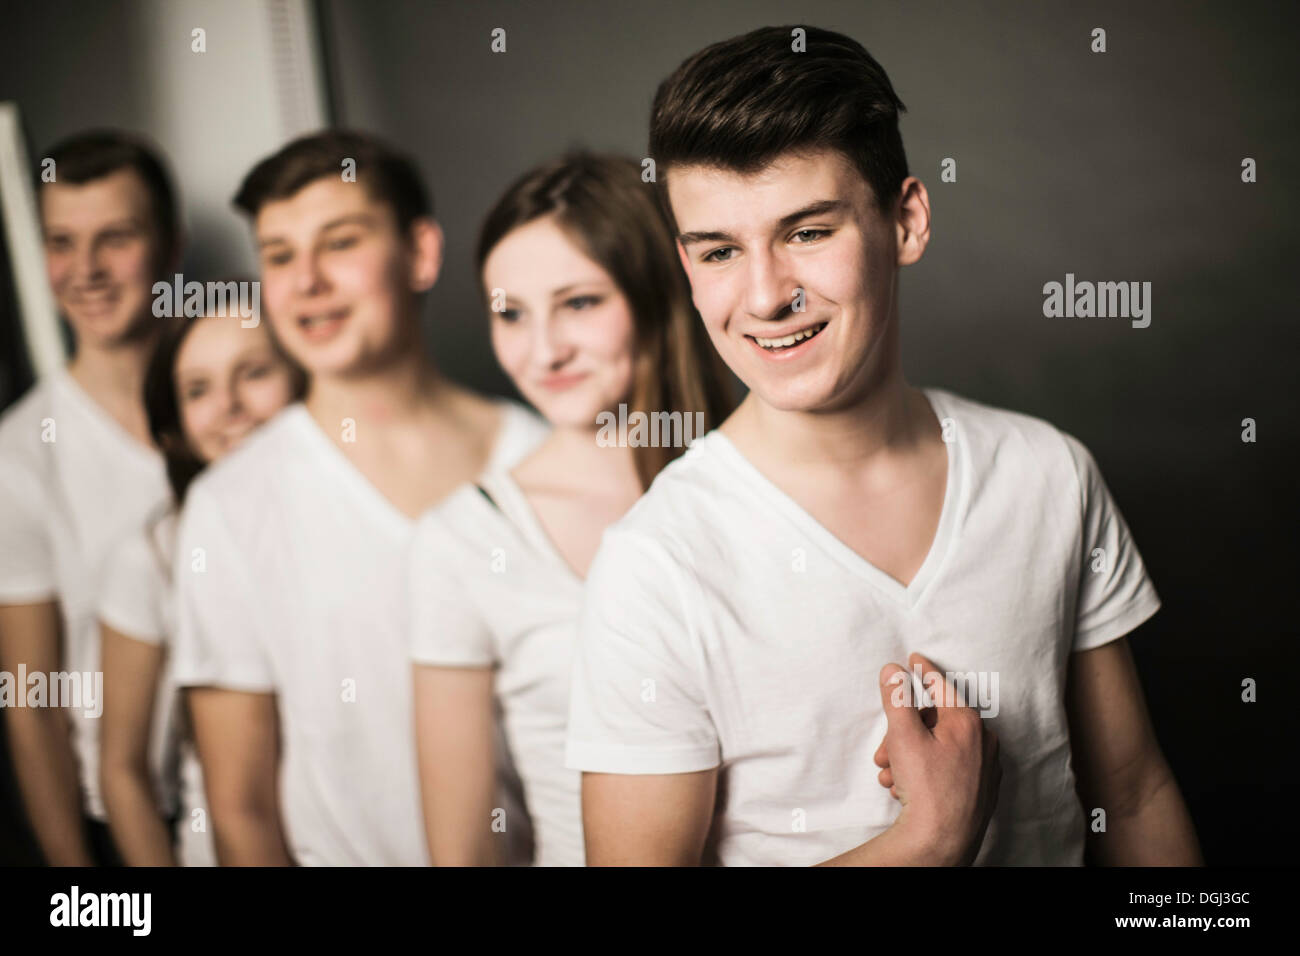 Five teenagers standing in row, all wearing white color top garments Stock Photo